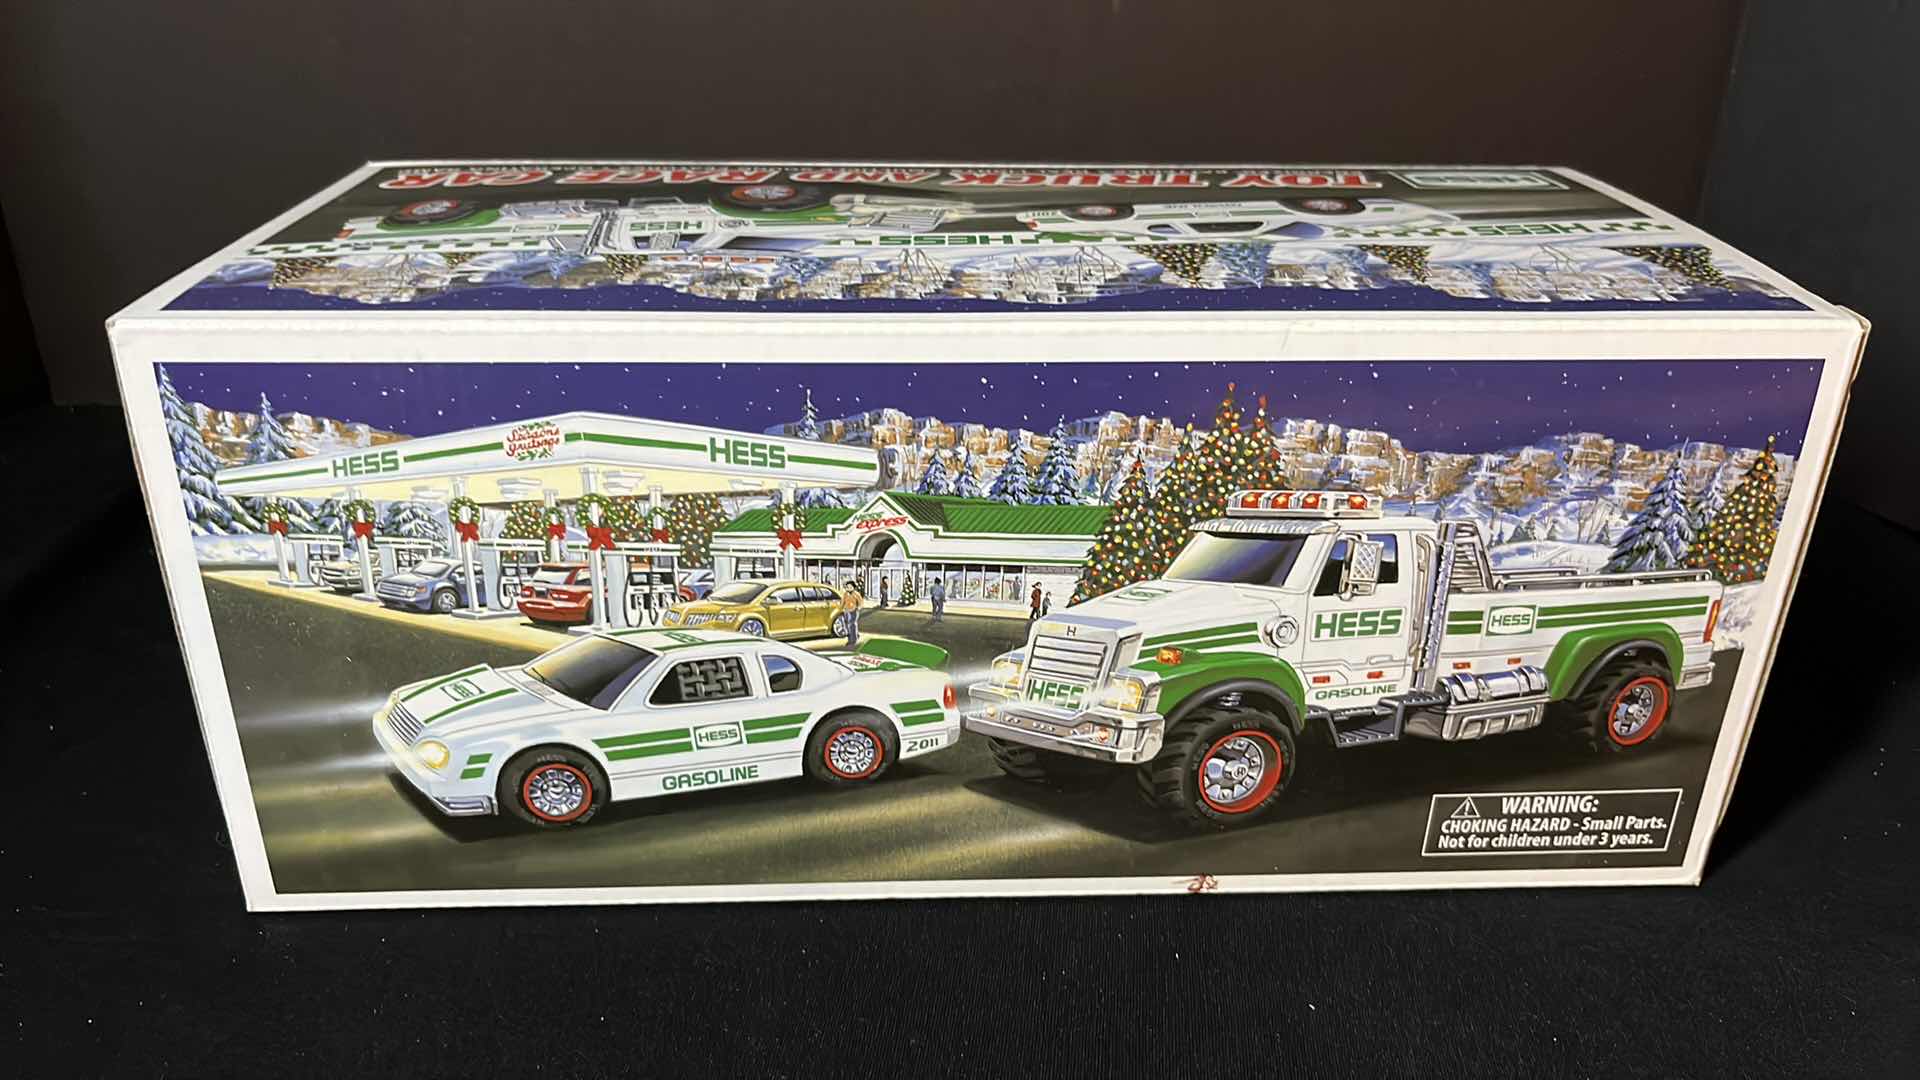 Photo 5 of HESS TOY TRUCK AND RACE CAR 2011